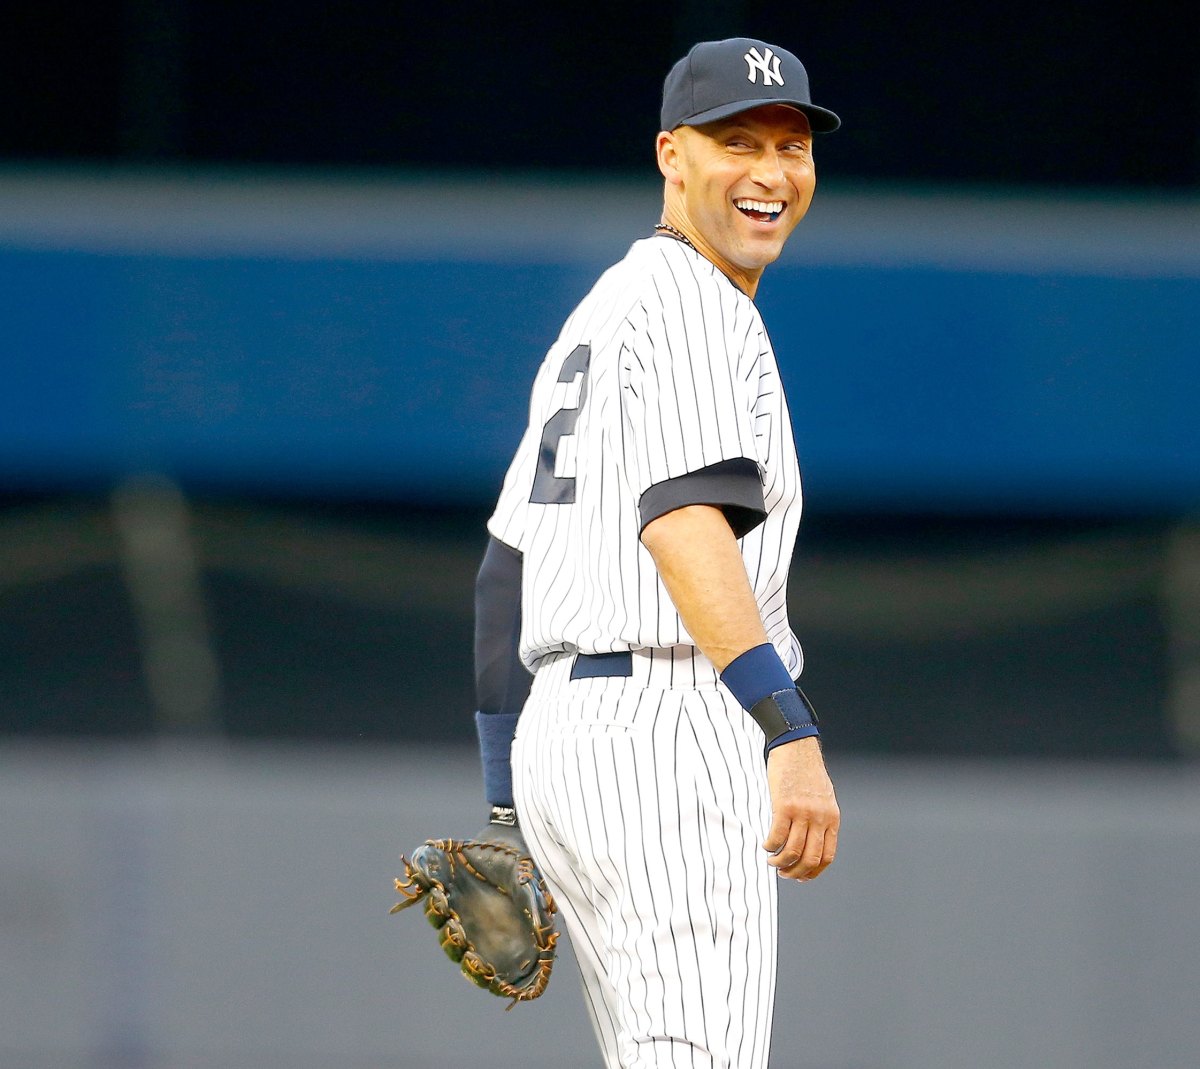 PHOTOS: Derek Jeter's No. 2 retired by the New York Yankees – The